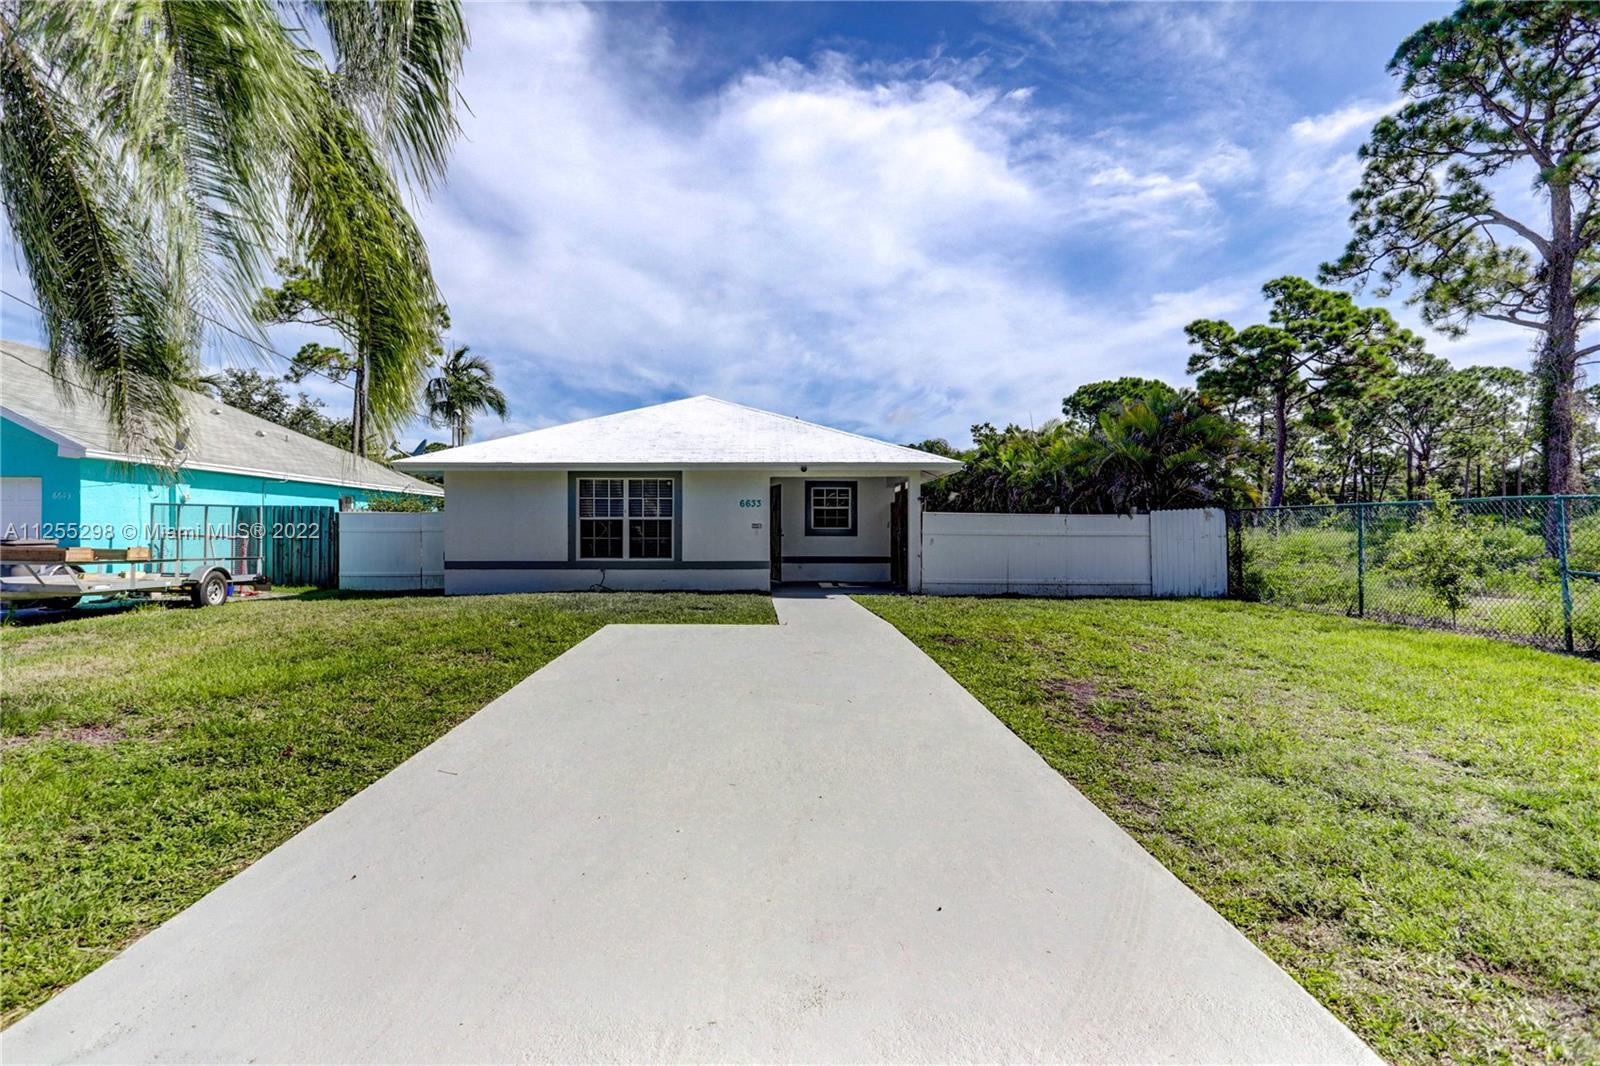 Only Single family home in Jupiter listed at this price! Home sits at the end of a dead end street w